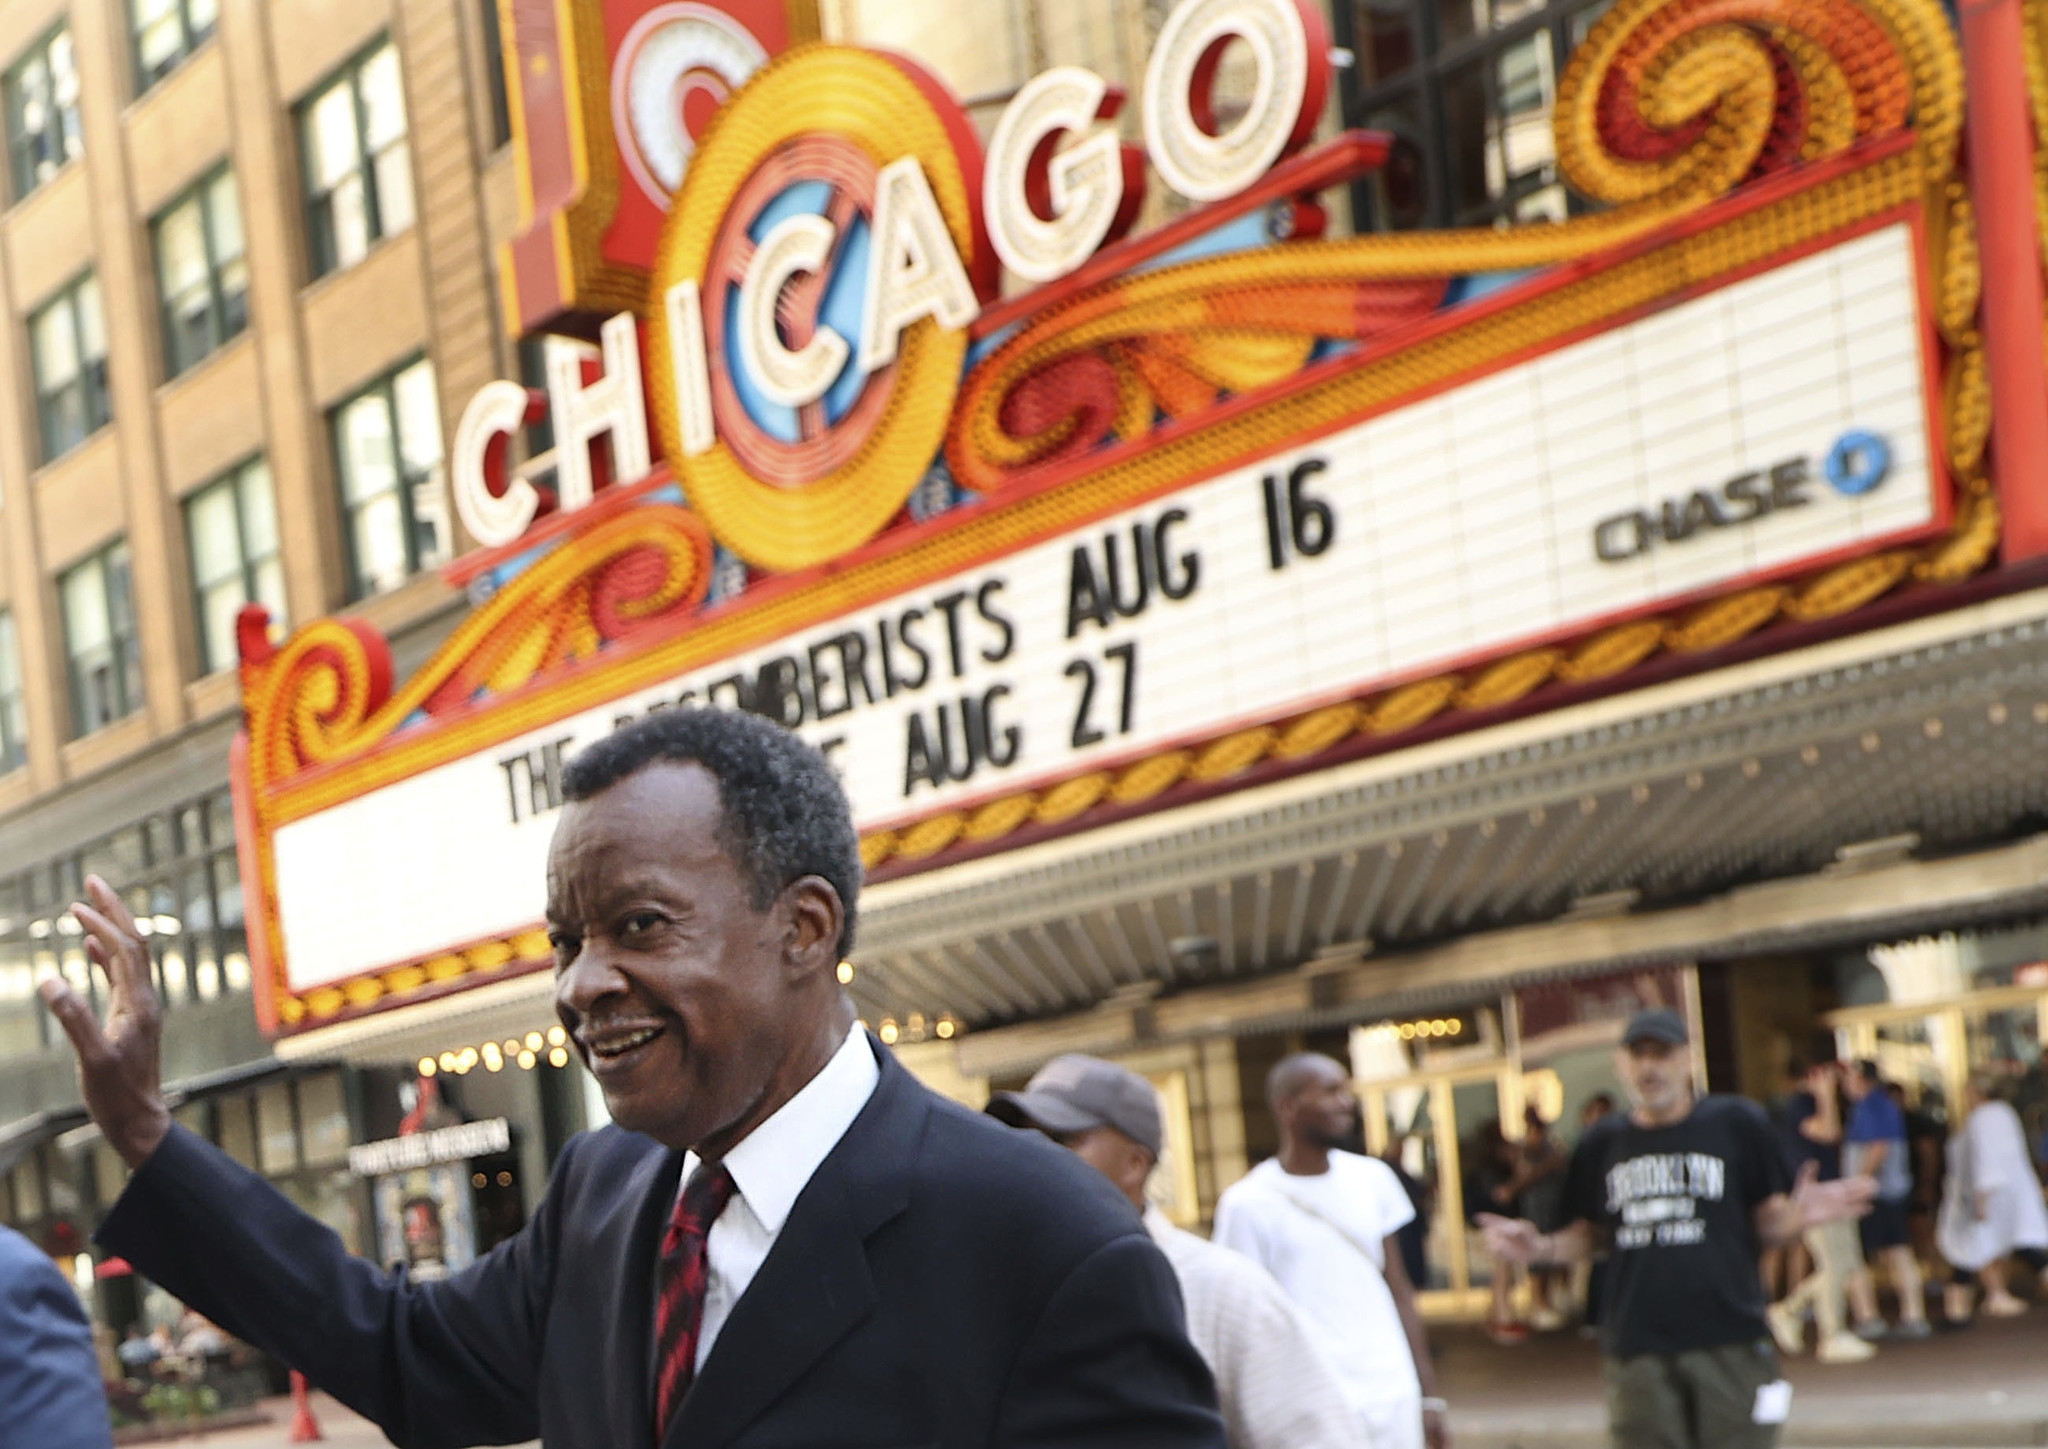 Willie Wilson announces 3rd gas giveaway - Chicago Sun-Times